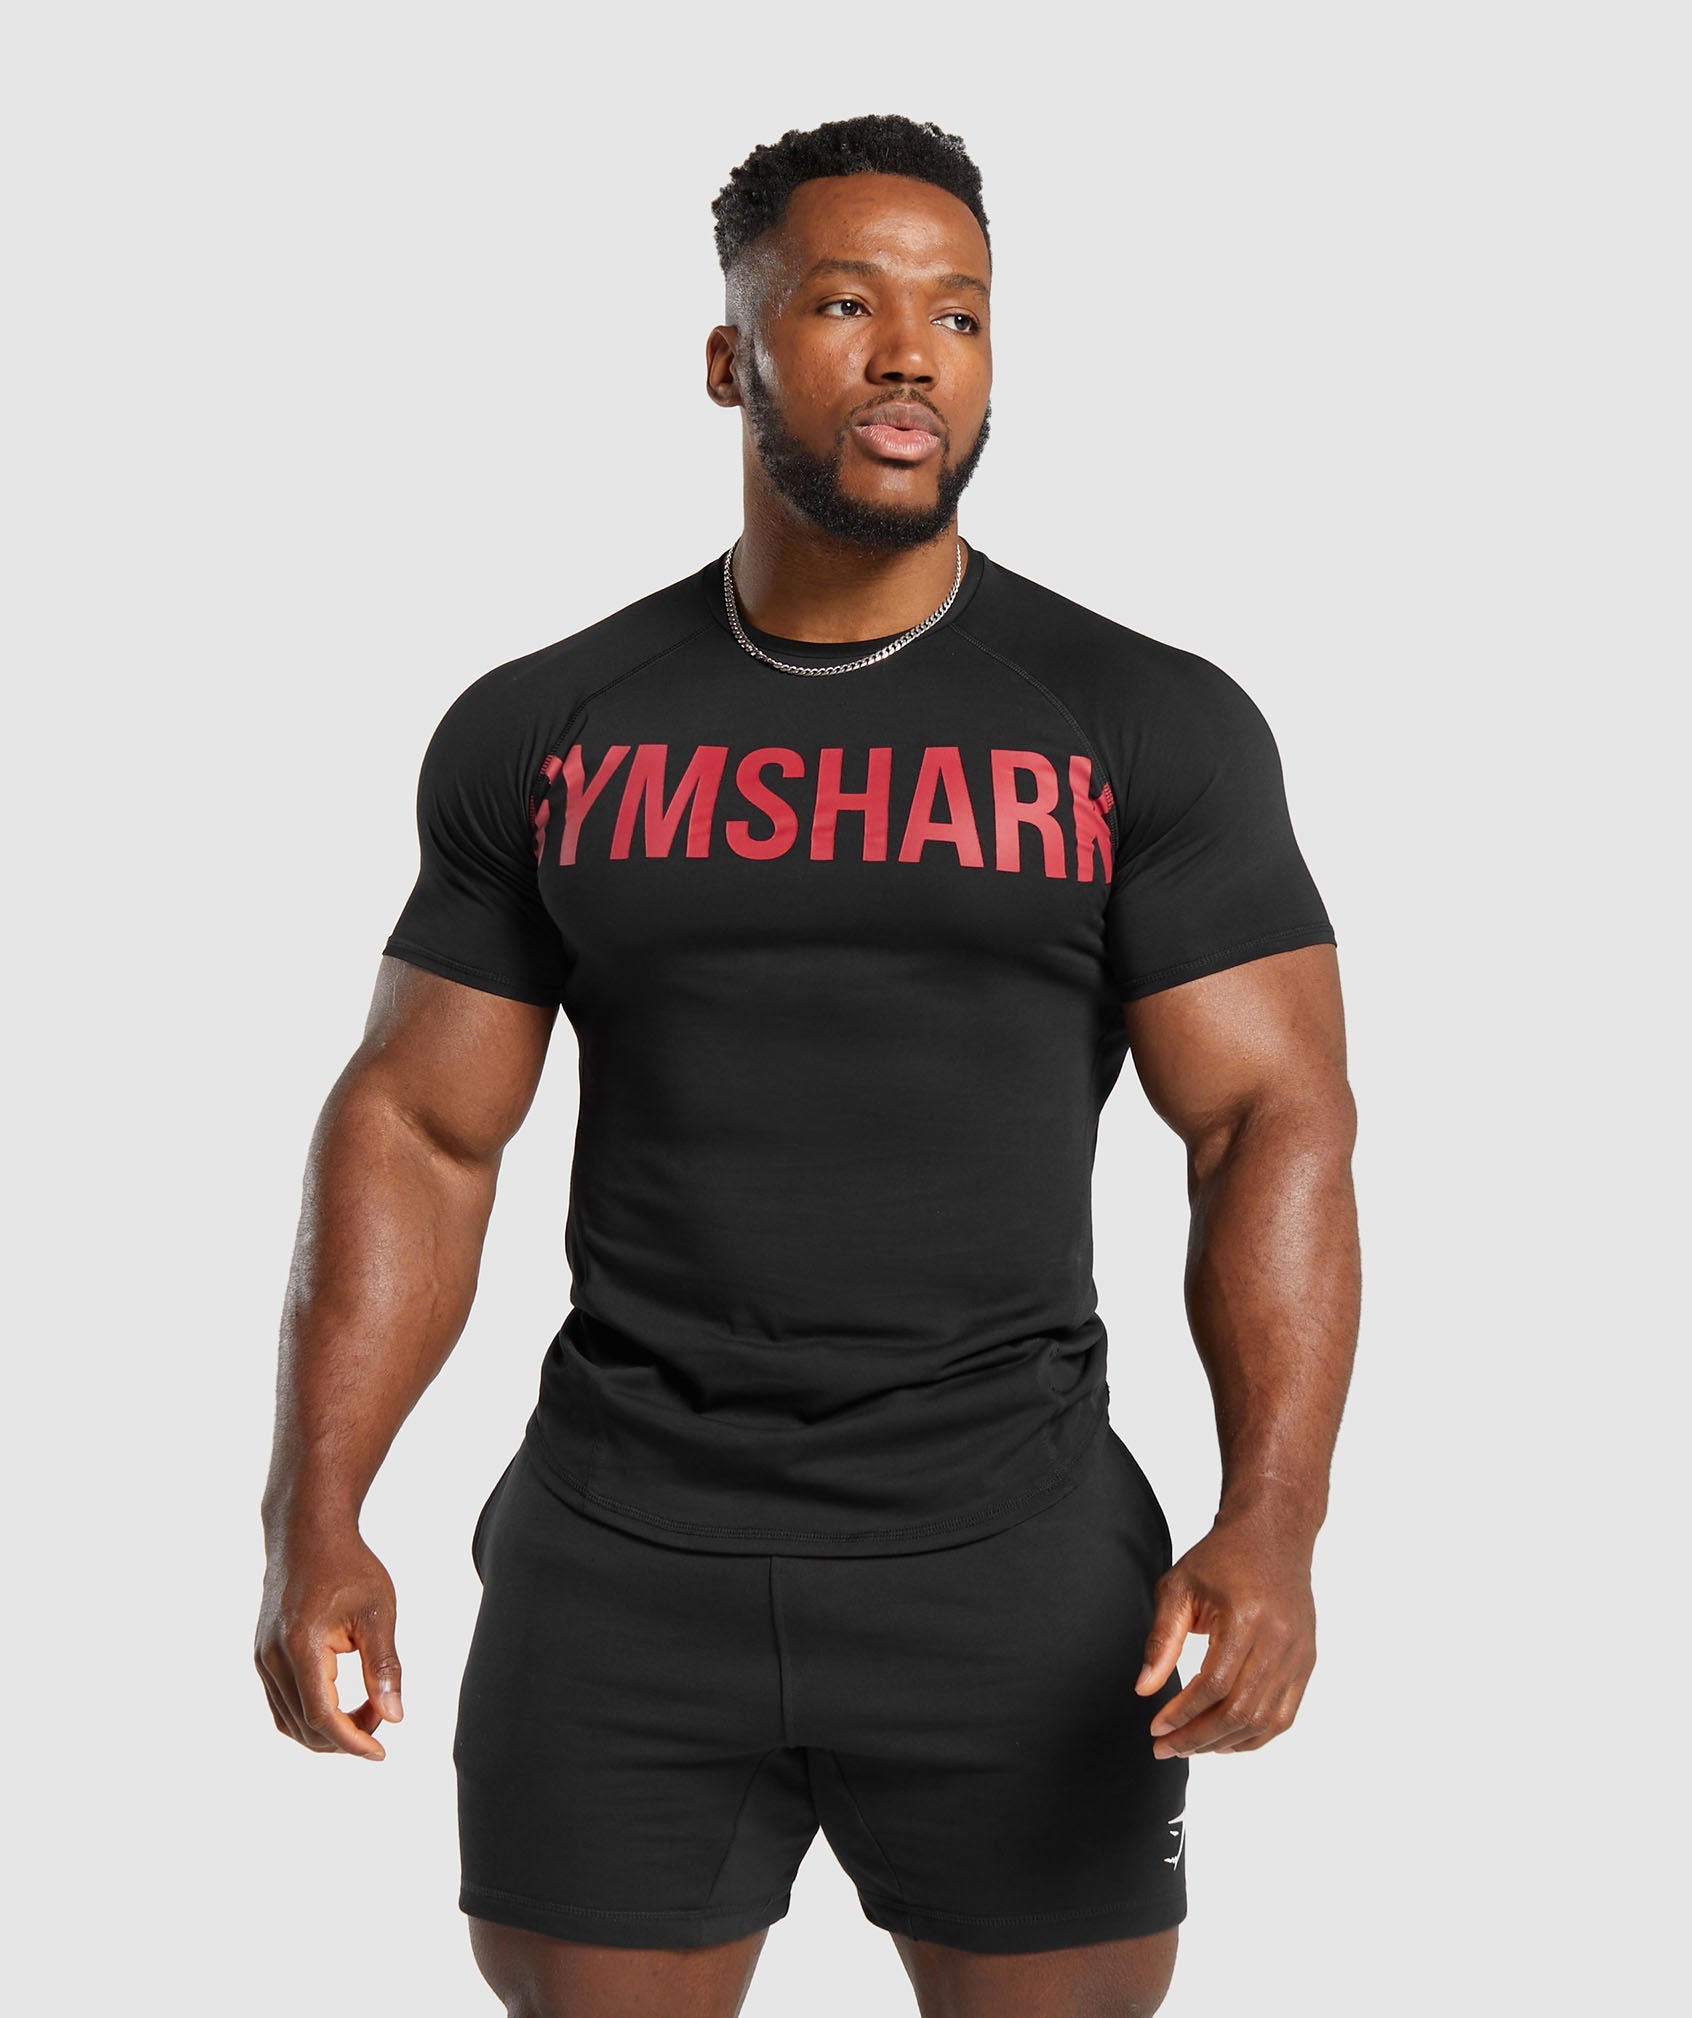 Impact Muscle T-Shirt in Black/Vivid Red - view 1